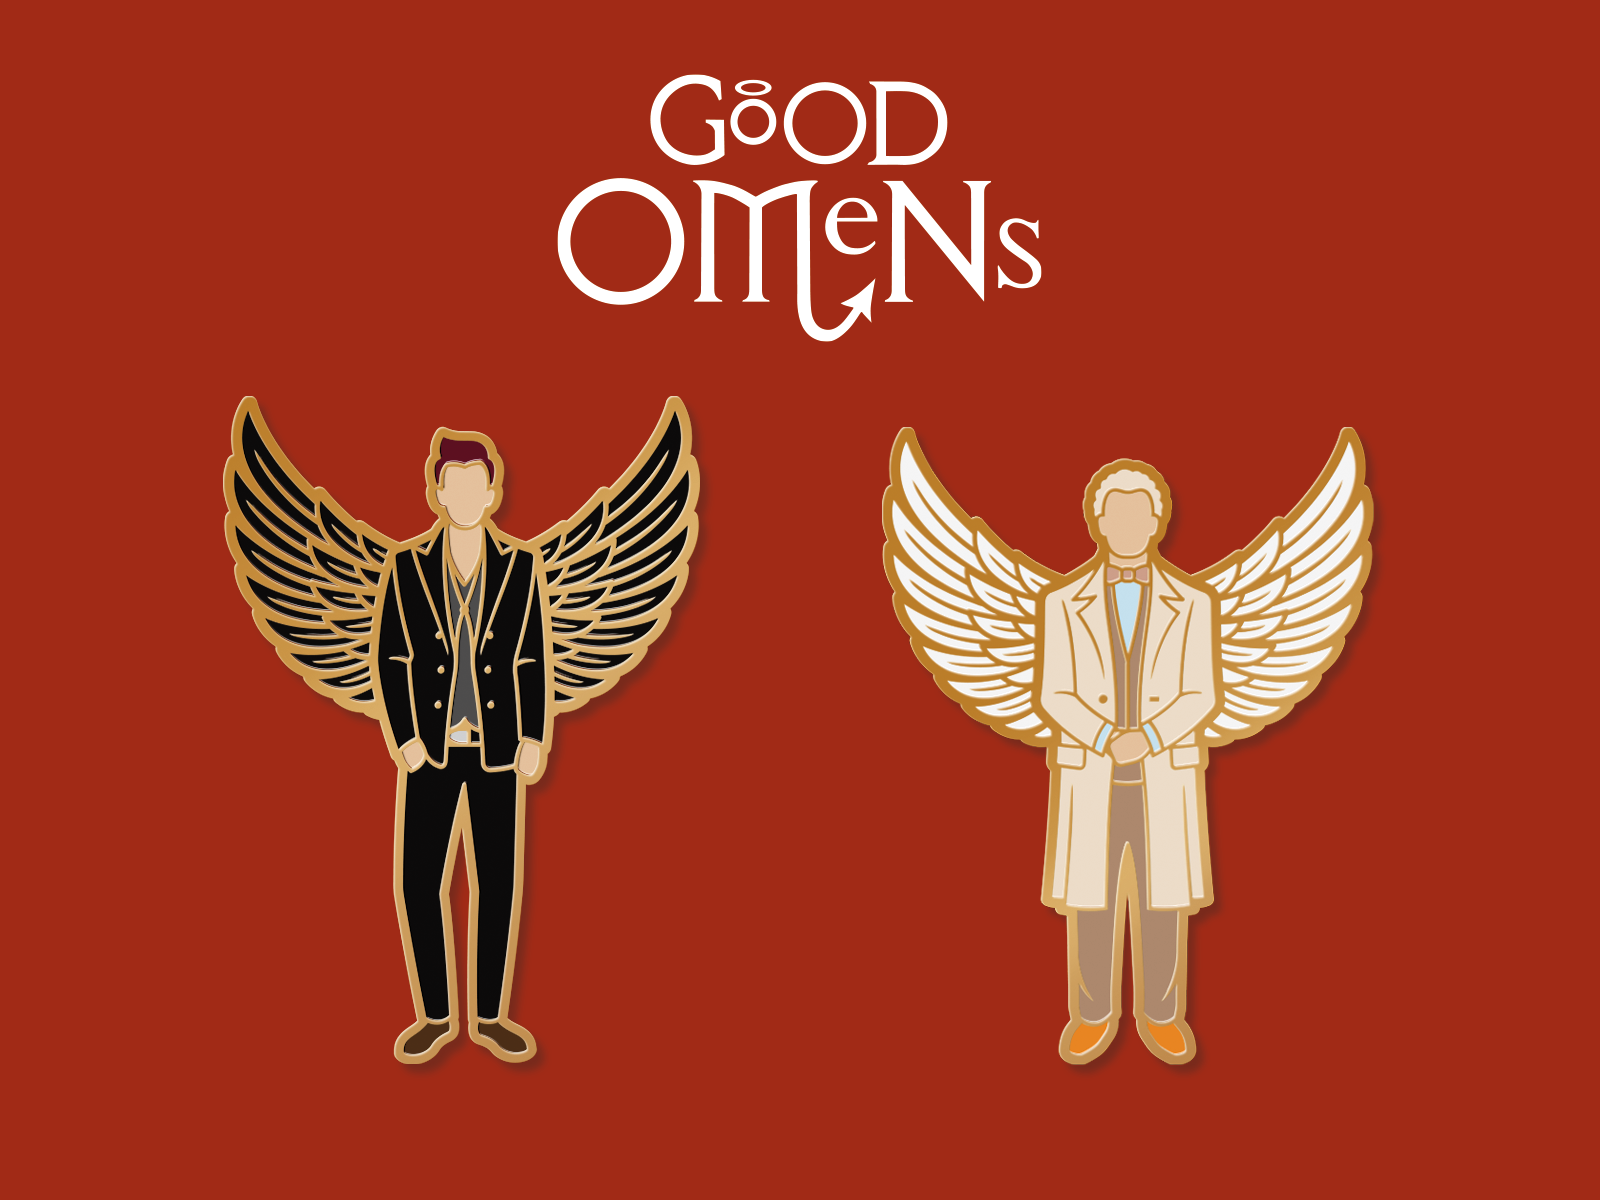 Good Omens Official Enamel Pins 001 002 Crowley And Aziraphale By Carl Sutton On Dribbble 5824